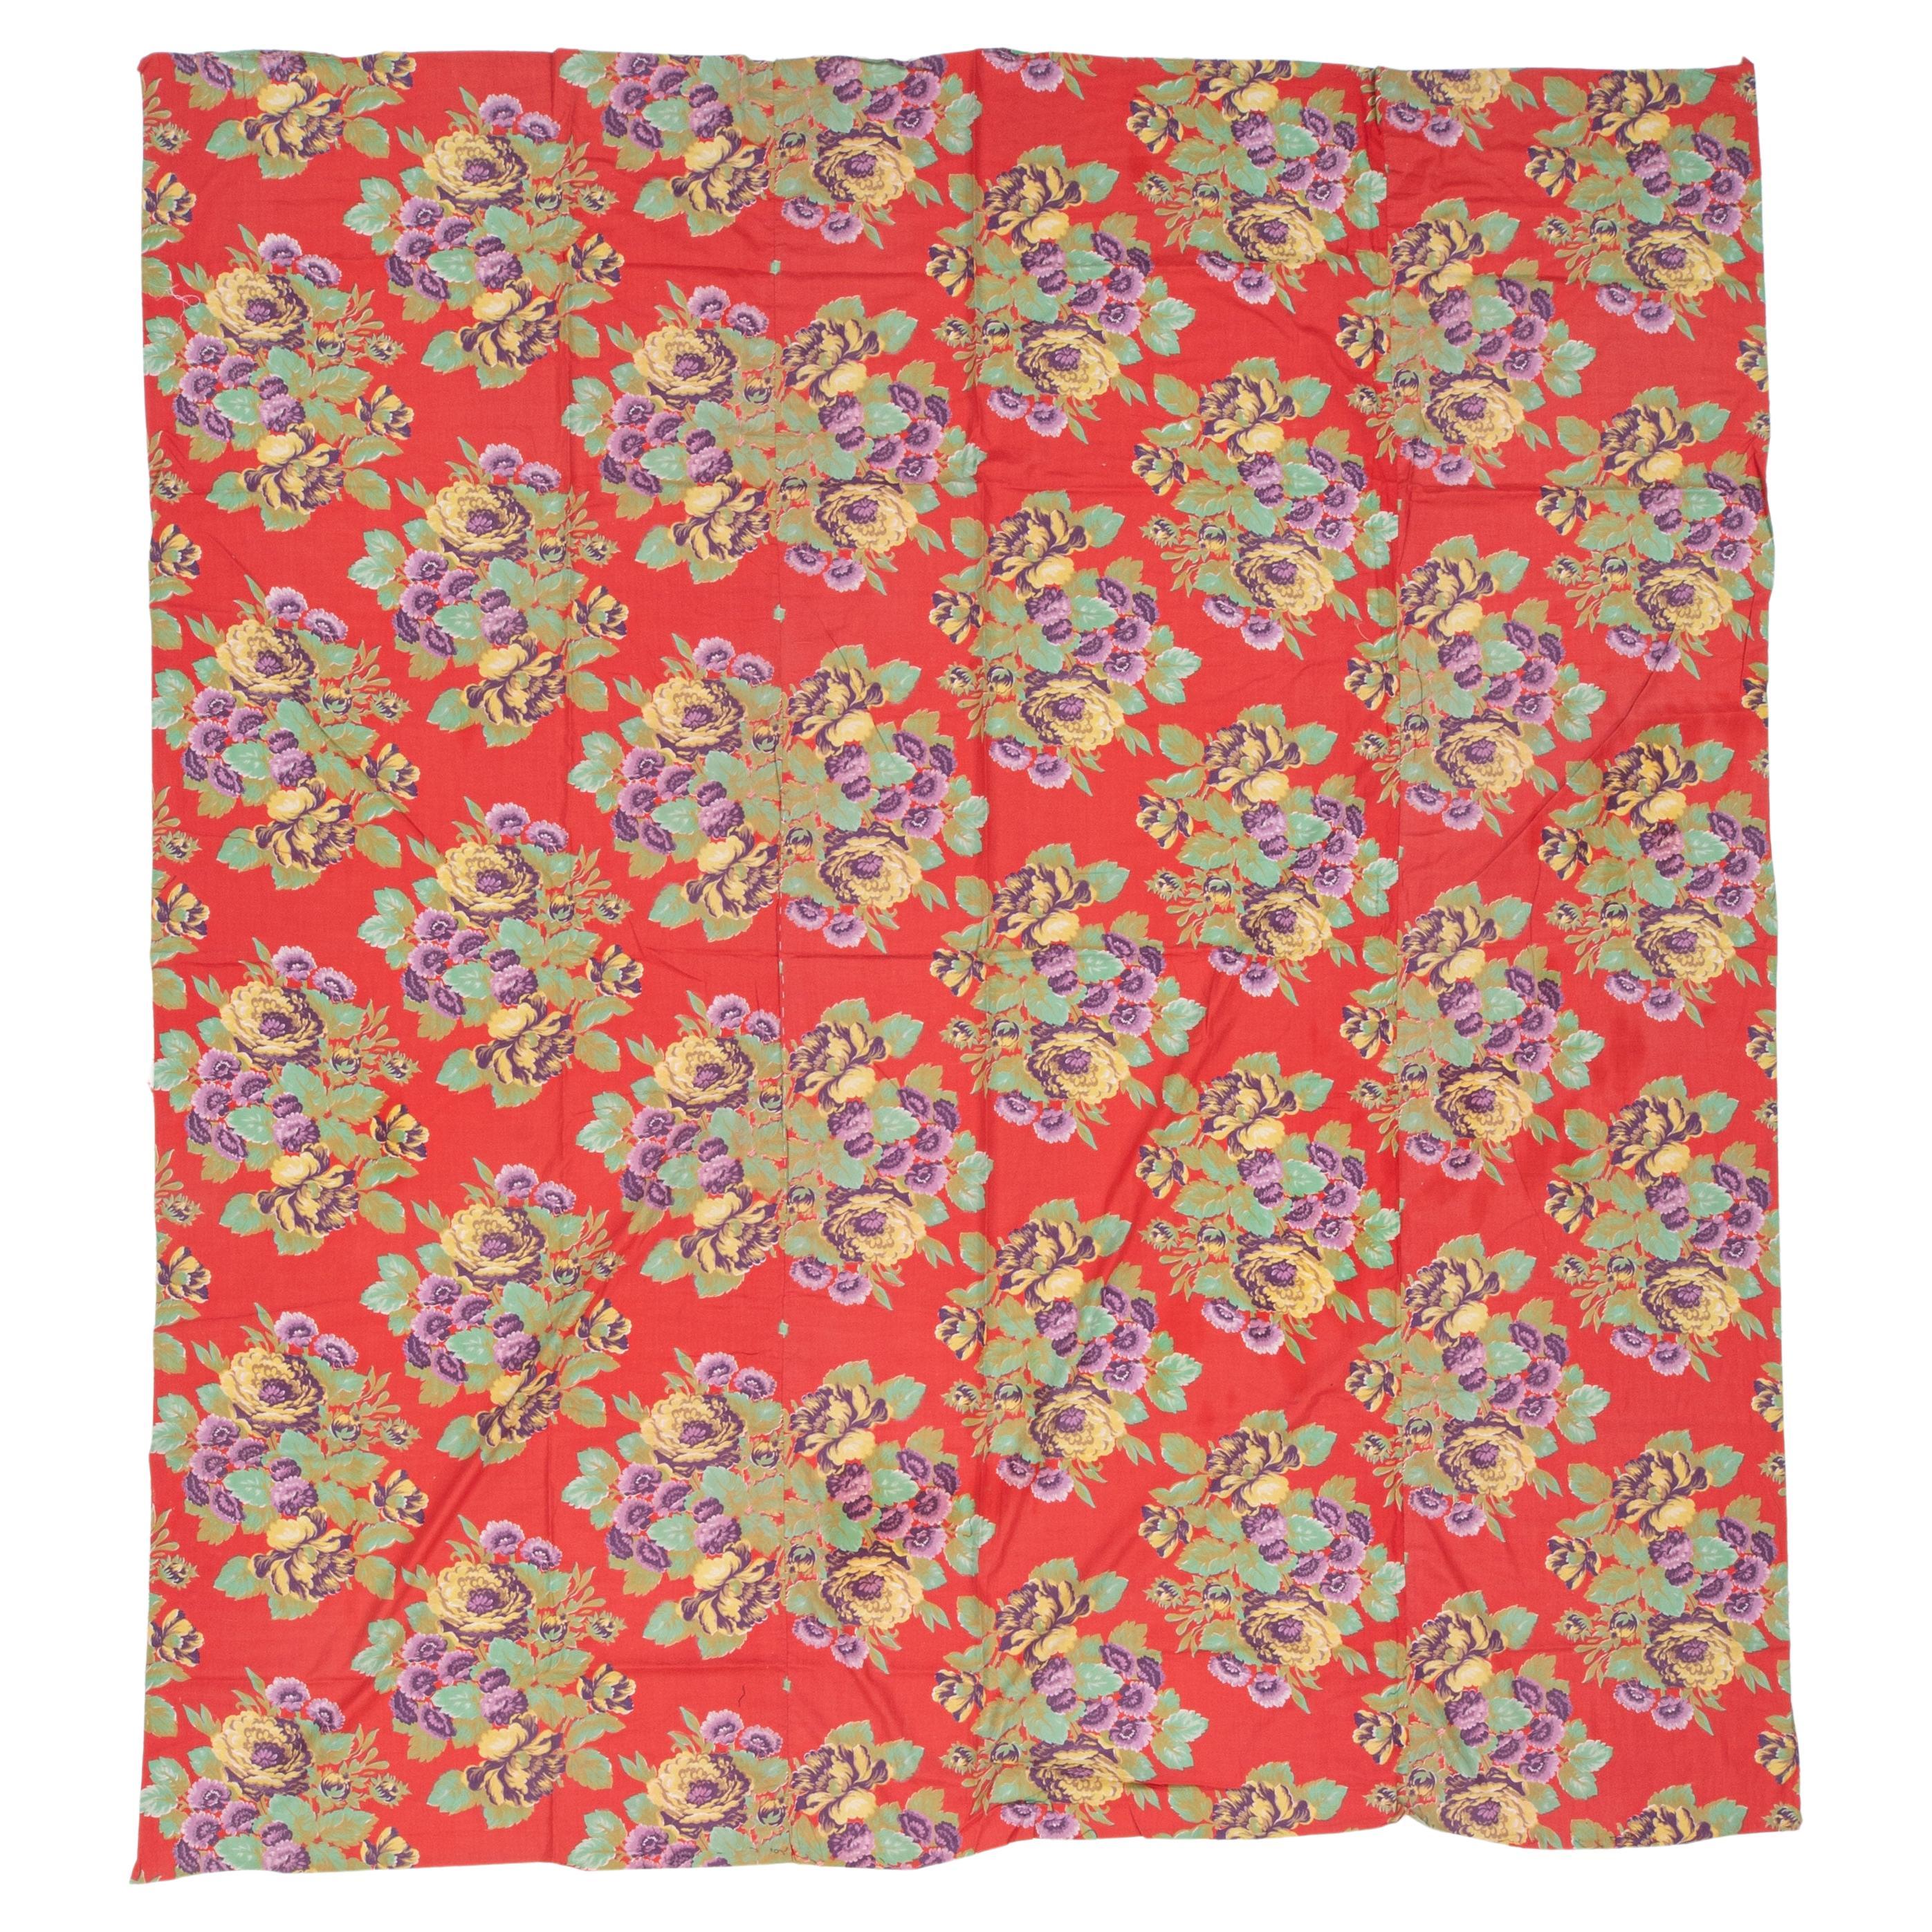 Roller Printed Cotton Panel, Made for Central Asian Markets  Mid 20th C.  Russia For Sale